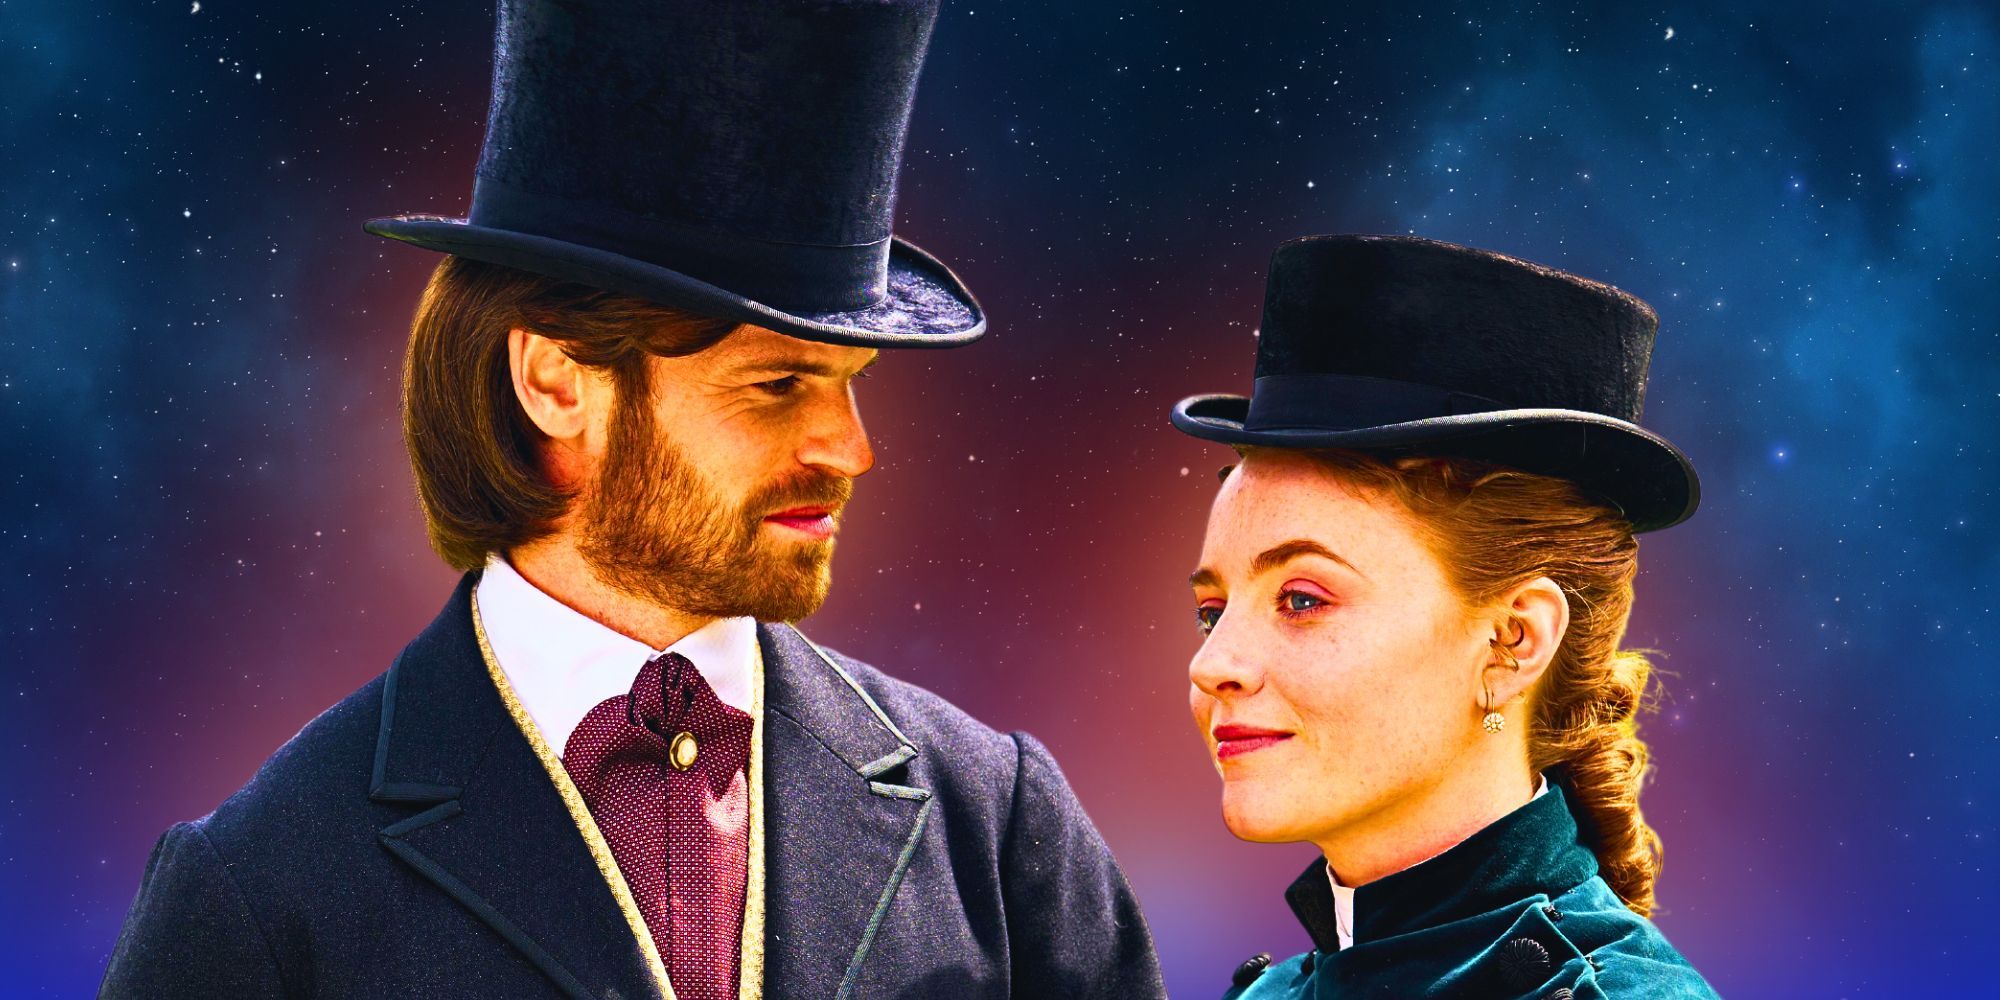 Benjamin Wainwright as Frederick and Harriet Slater as Clara in Belgravia The Next Chapter